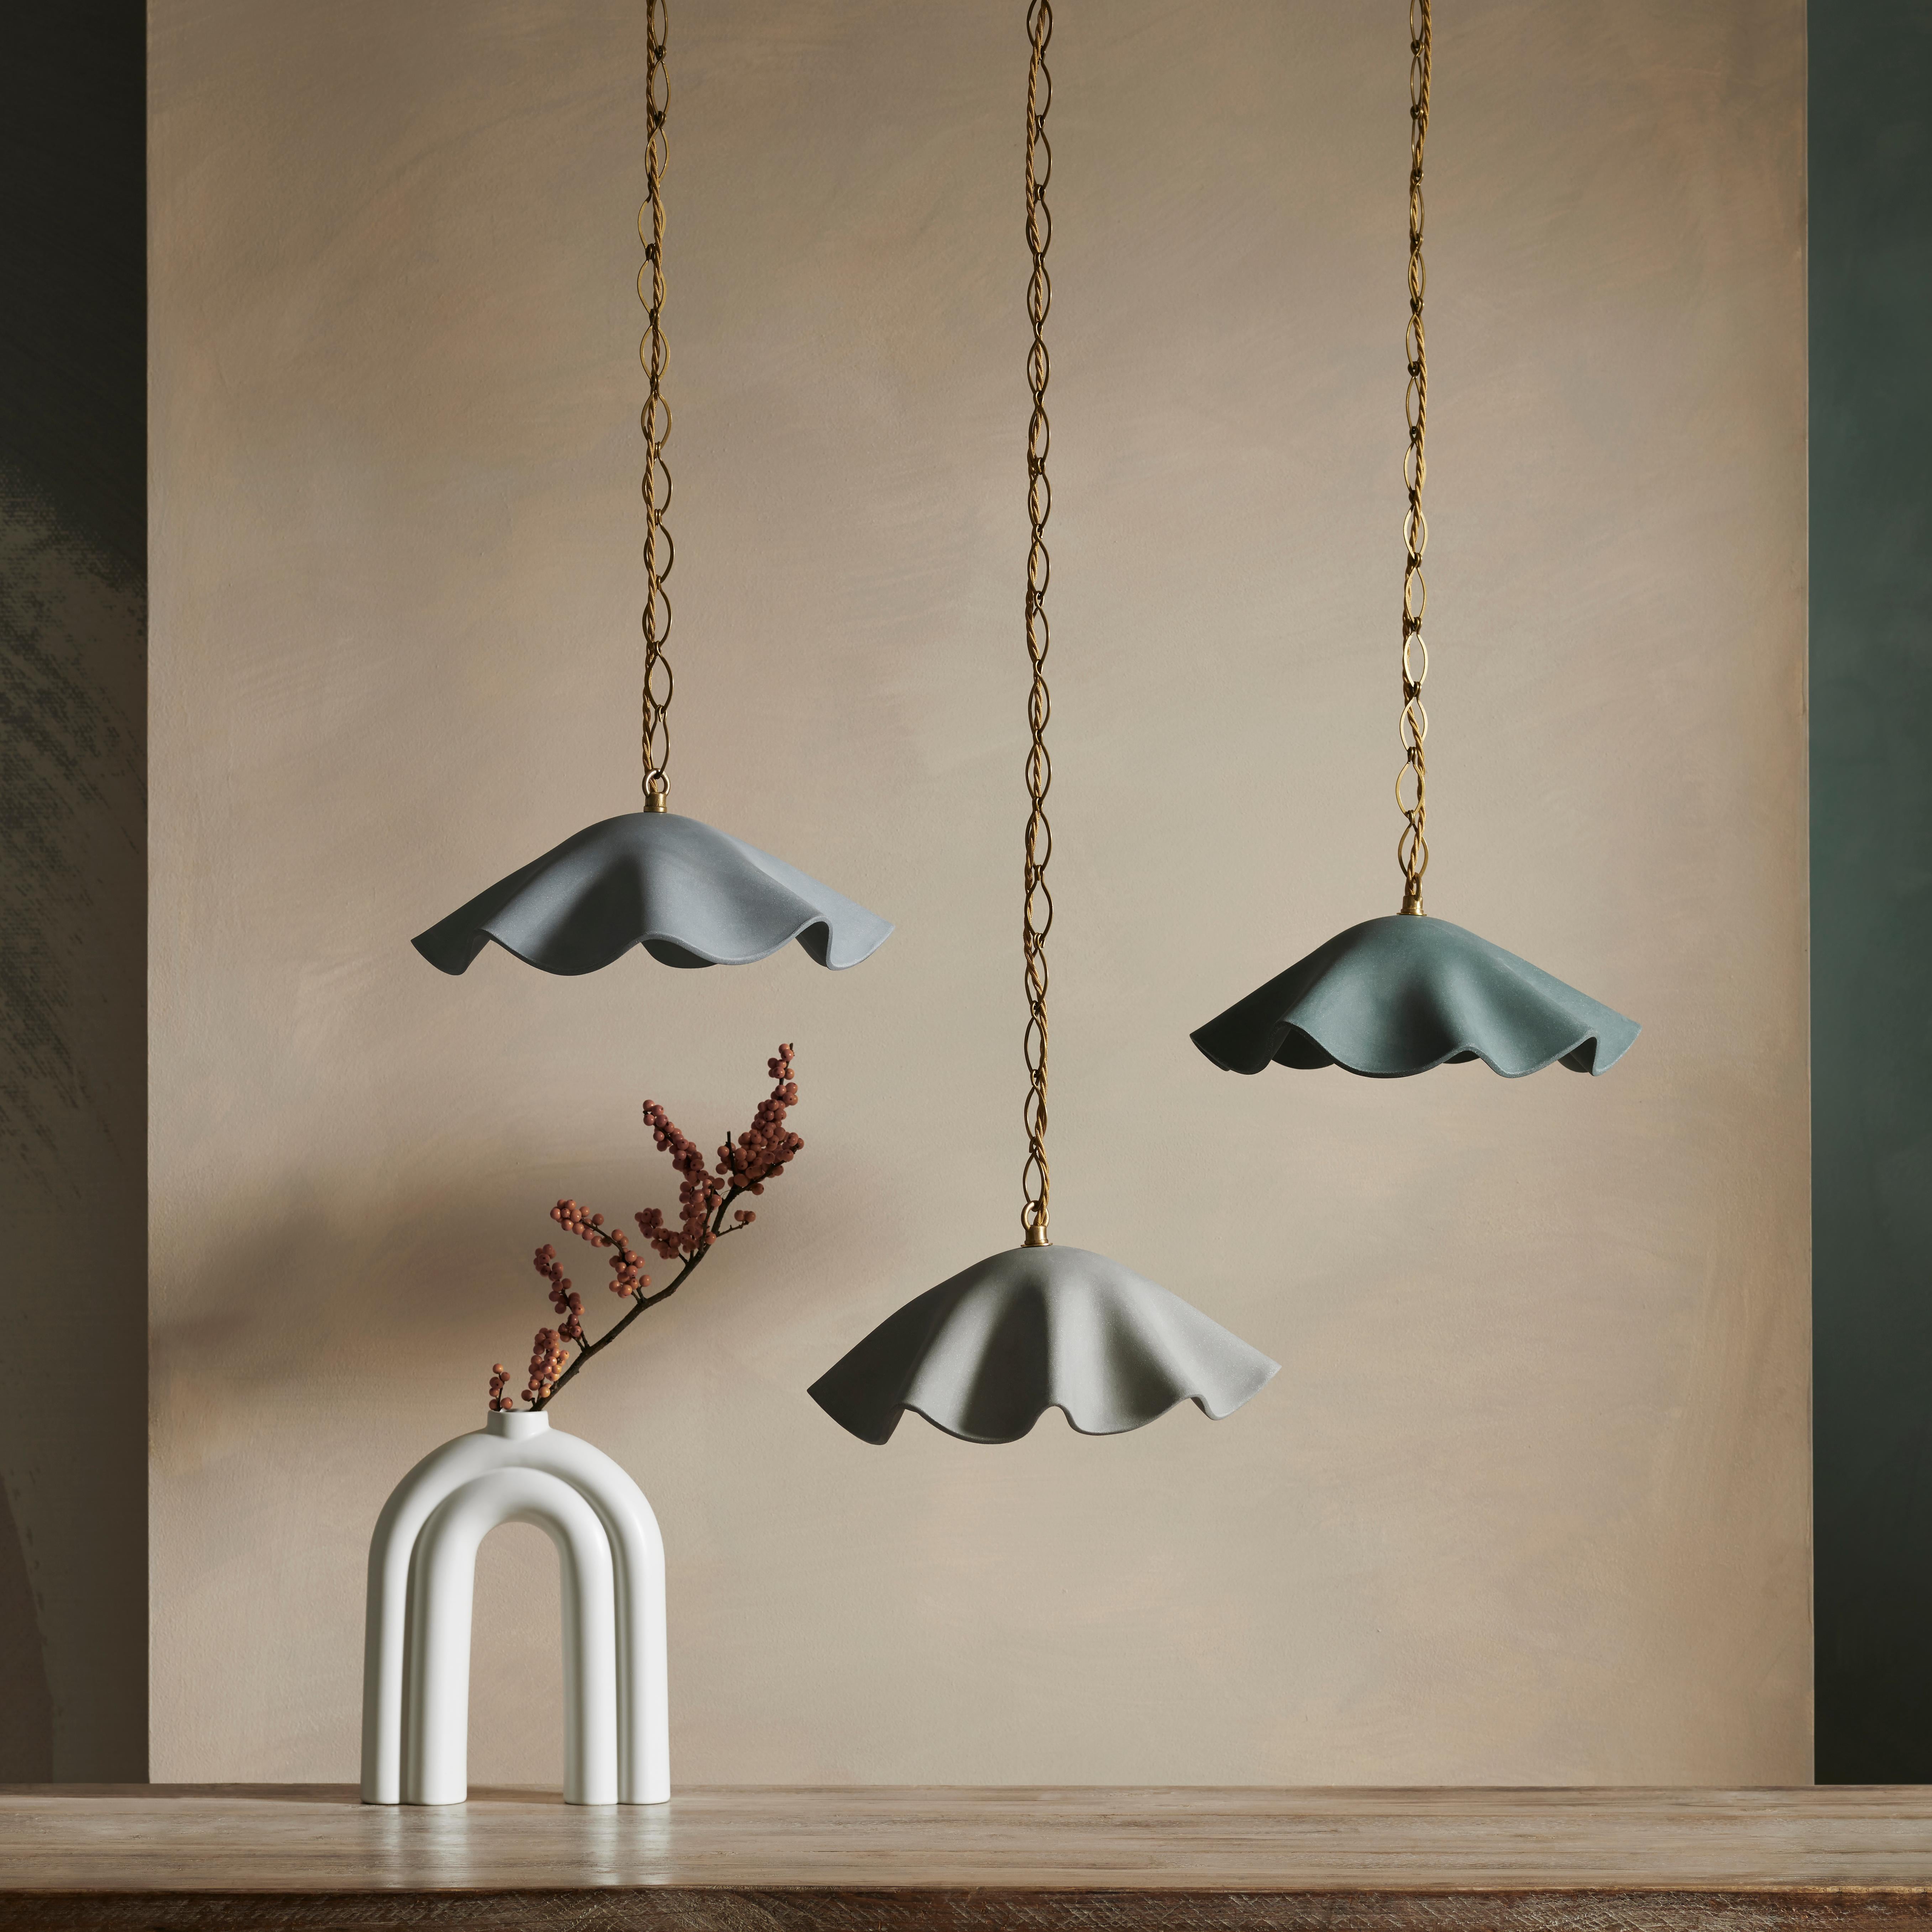 Our Rufilini Pendant – undulating ceramic lights handcrafted with utmost care. Available in two different sizes and an array of stunning colours, the Rufilini is perfect for illuminating your dining table or enhancing your kitchen island area. The